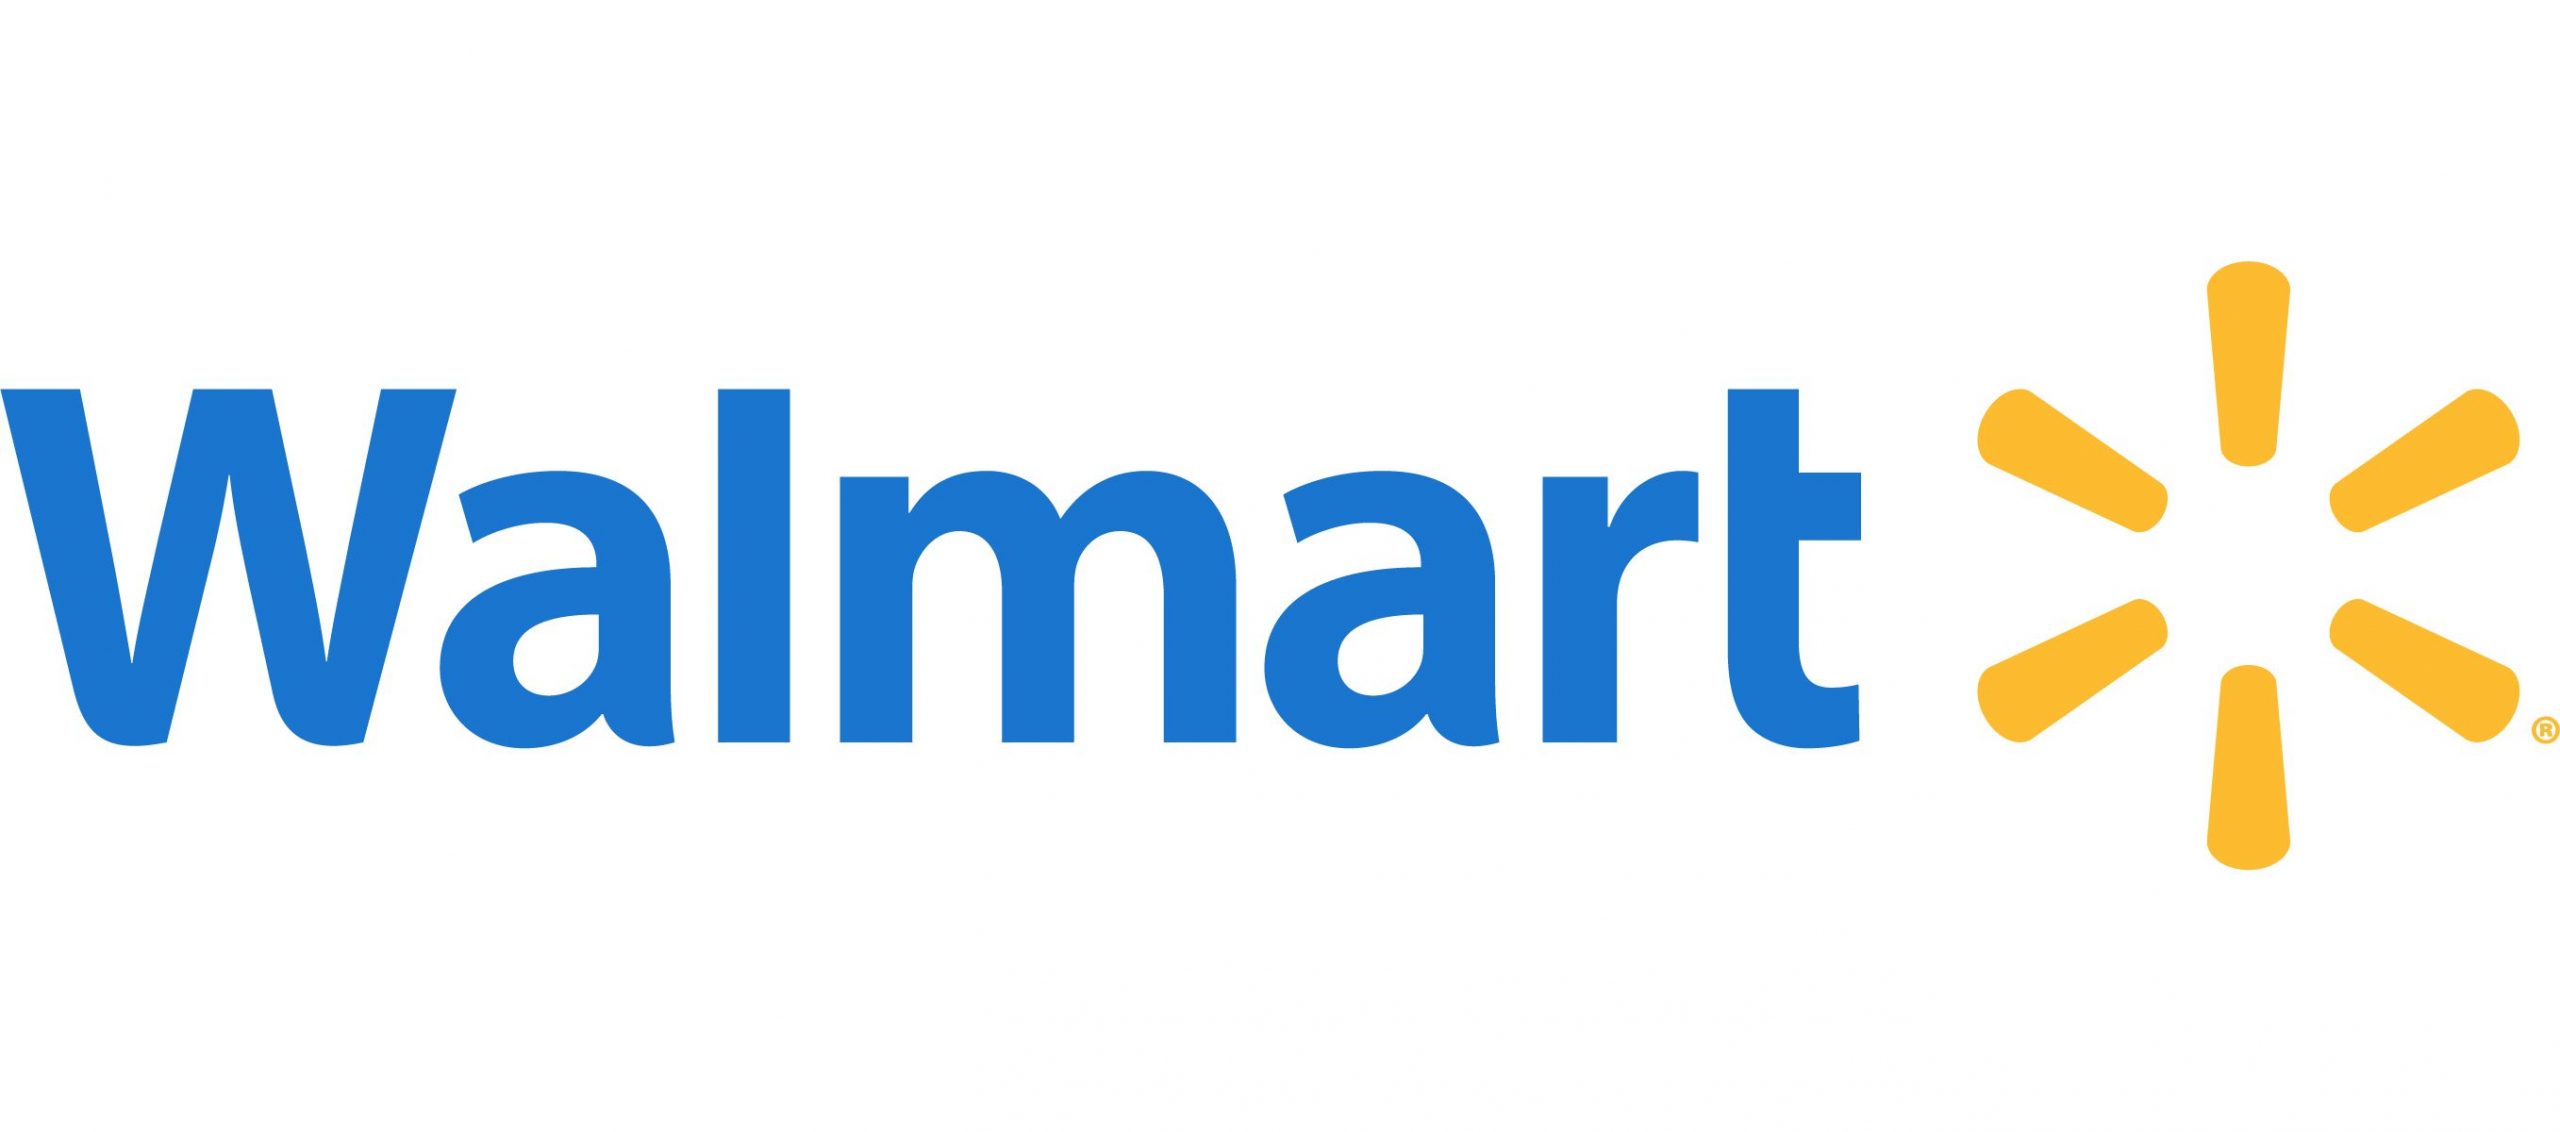 Walmart is not a value investment: